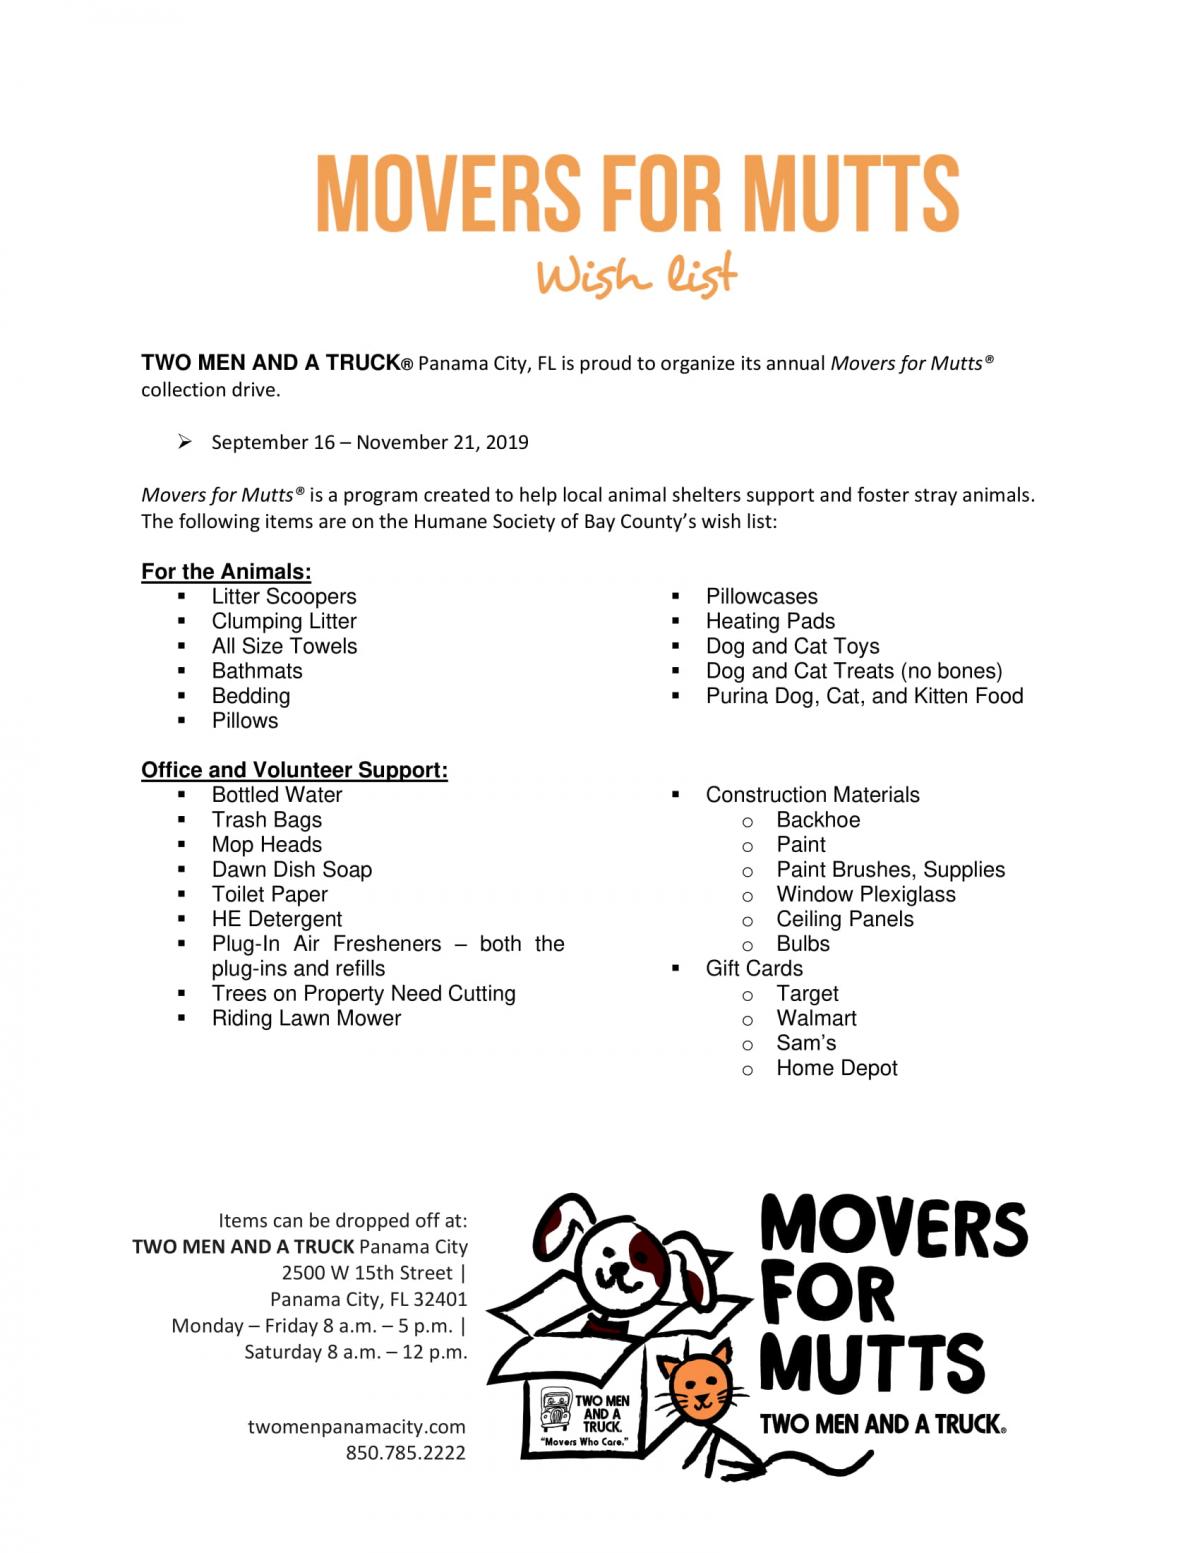 2019 Movers for Mutts Wish List